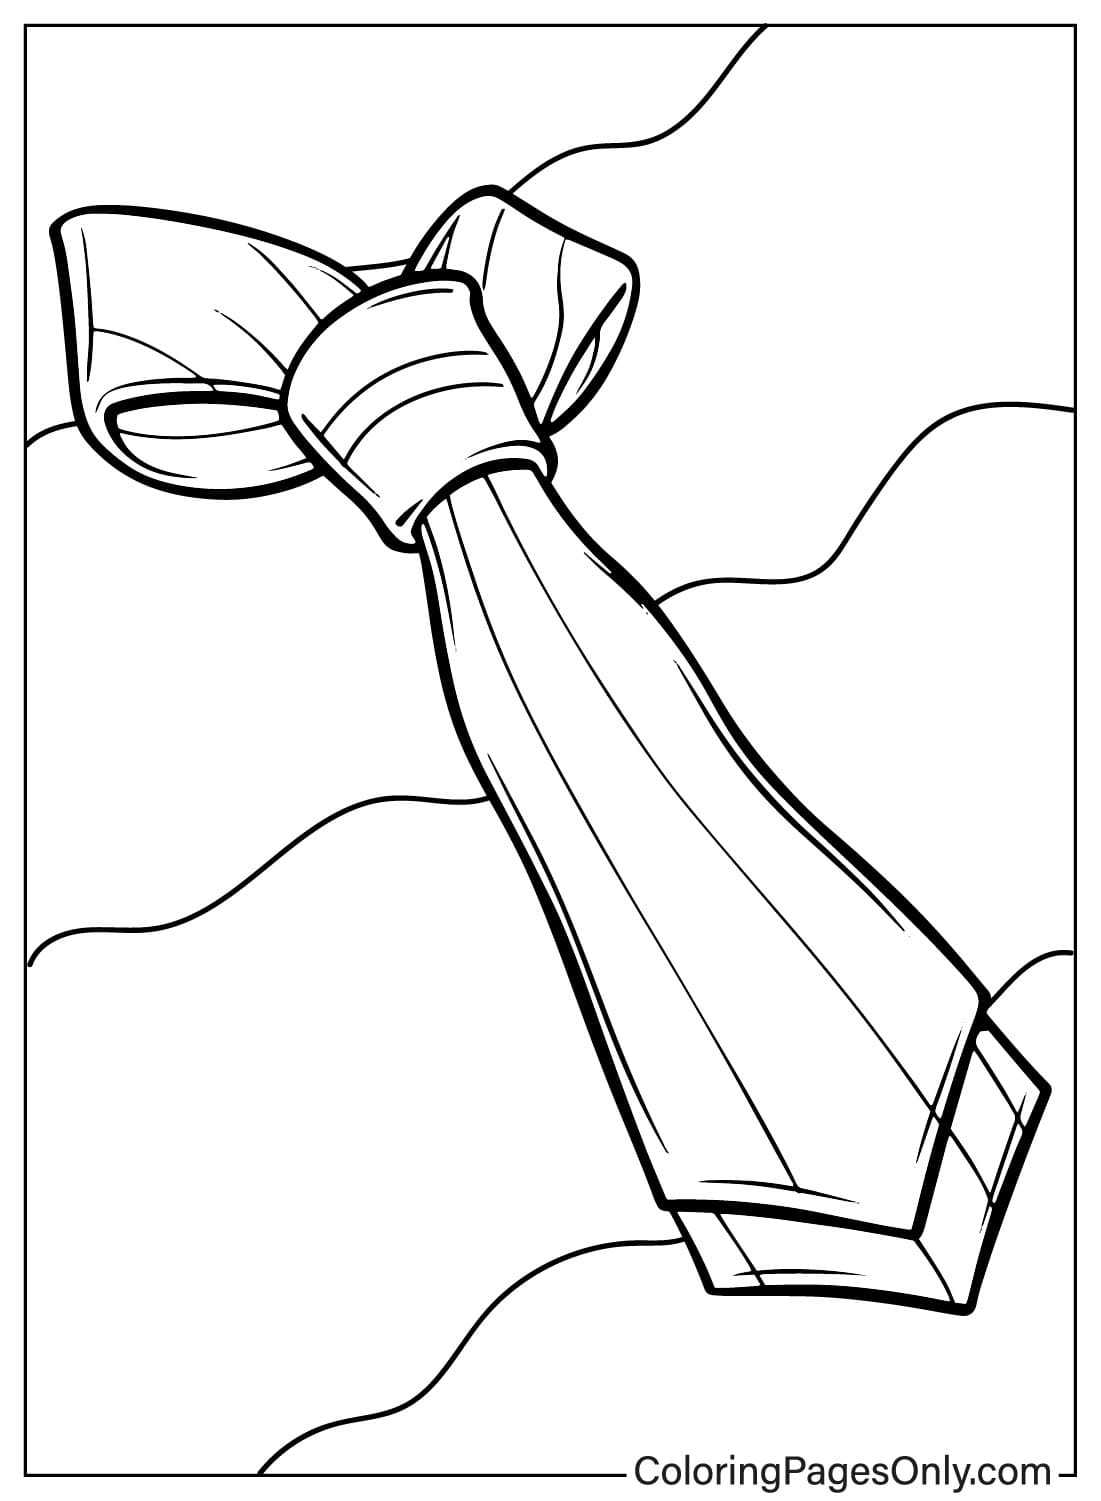 Free Tie Coloring Page from Tie